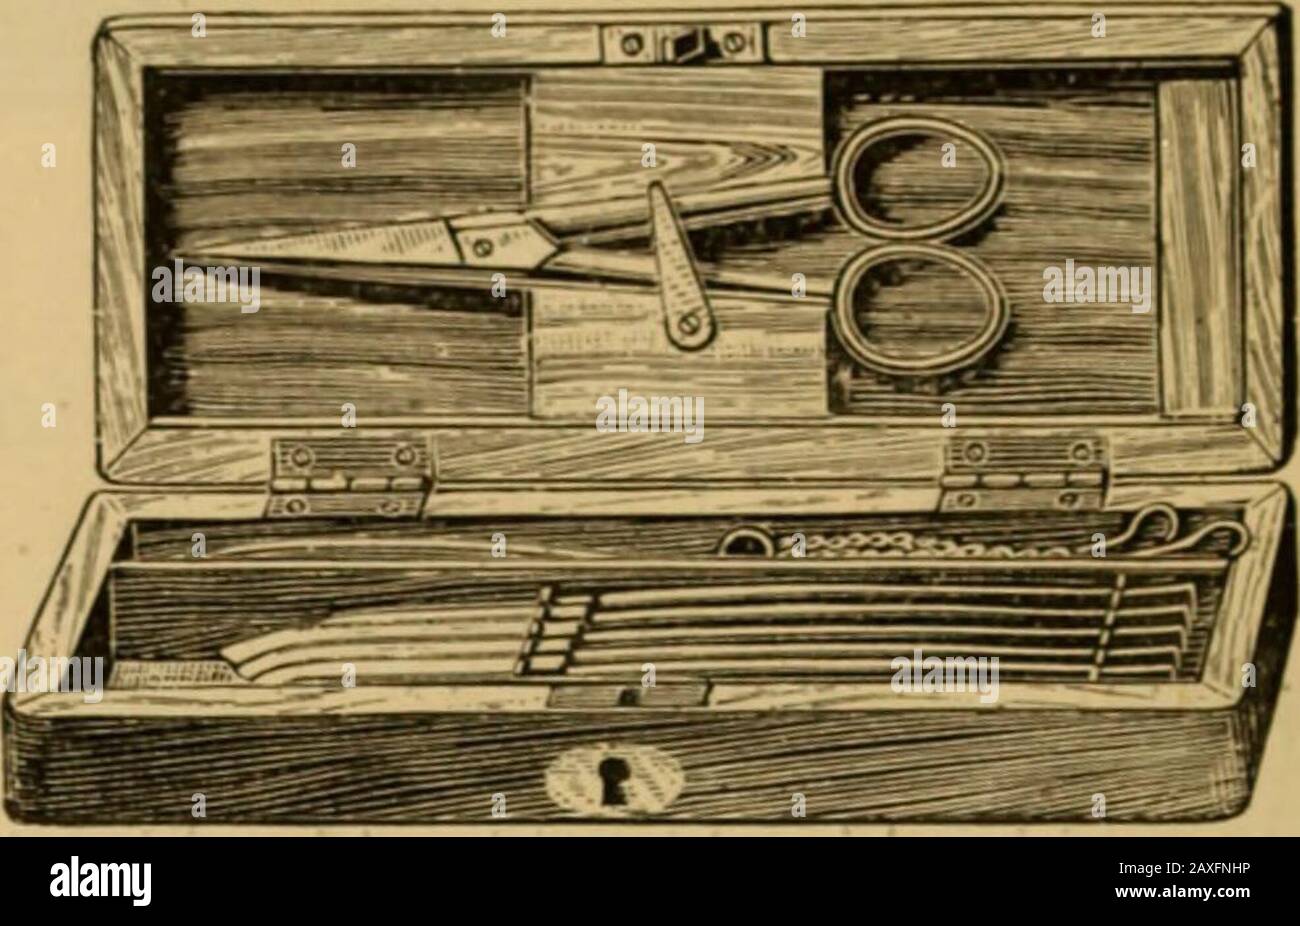 Catalogue of surgeons instruments and medical appliancesElectro-therapeutic  apparatusSundries for the surgery and sick-room, medicine chests, etc .  Hammers, Post-Mortem (Fig. 435) 7/6 each. Hooks, blunt 1/9 ,, Do. double  4/6 ,, Needles,